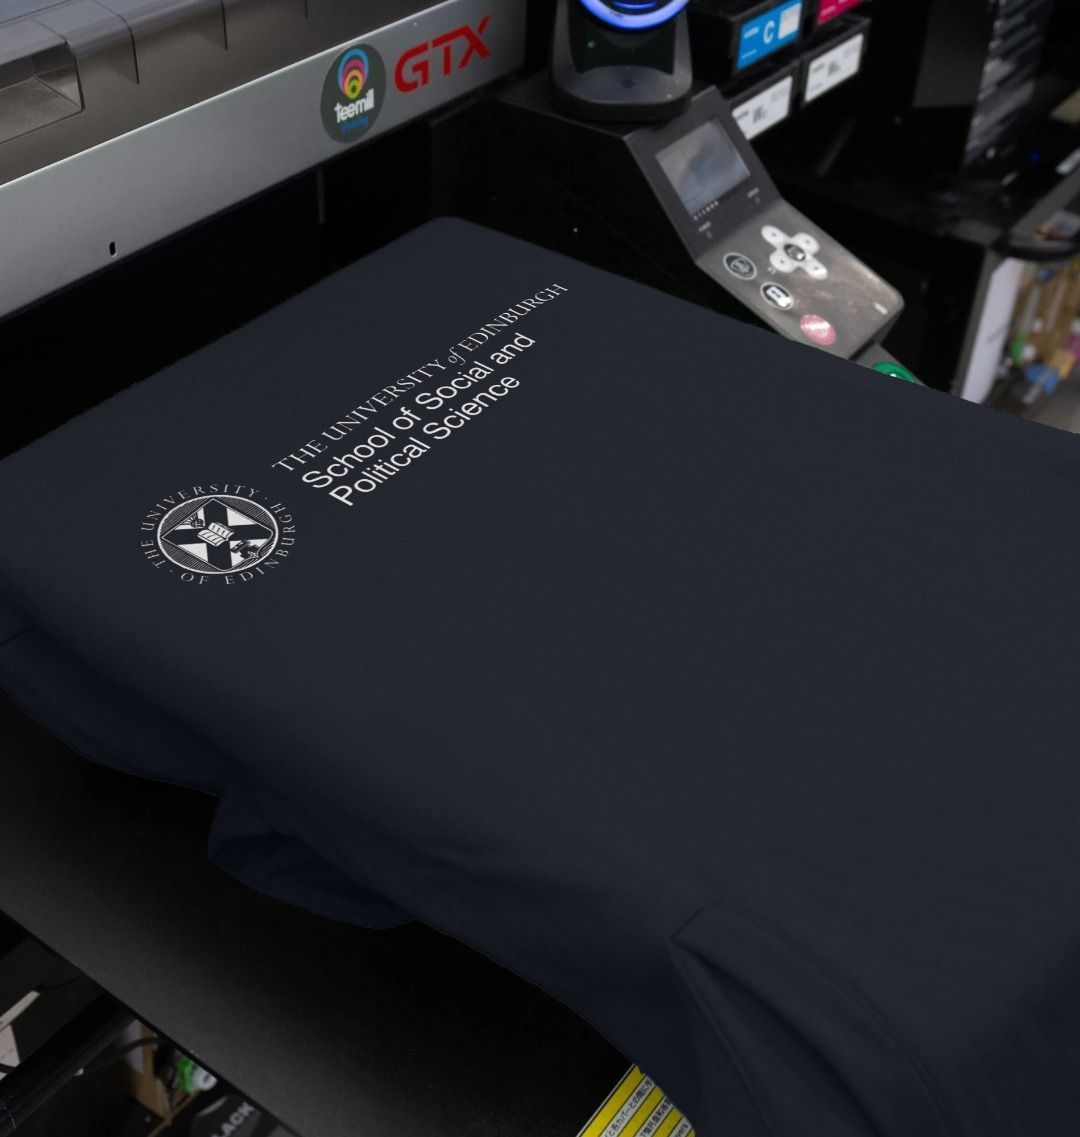 Our School of Social and Political Science Hoodie being printed by our print on demand partner, teemill.